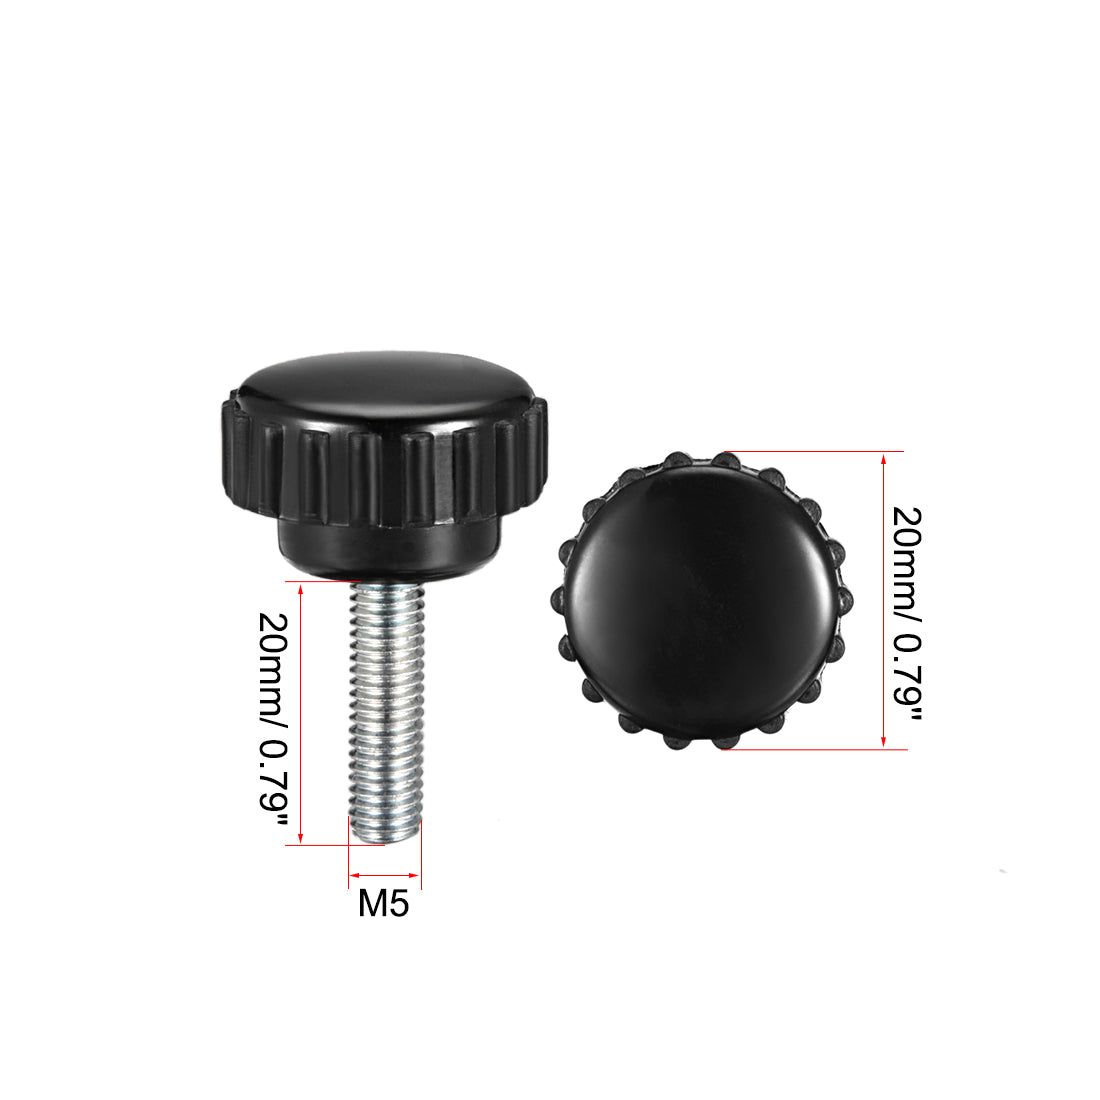 Uxcell Uxcell M5 x 20mm Male Thread Knurled Clamping Knobs Grip Thumb Screw on Type Round Head 5 Pcs